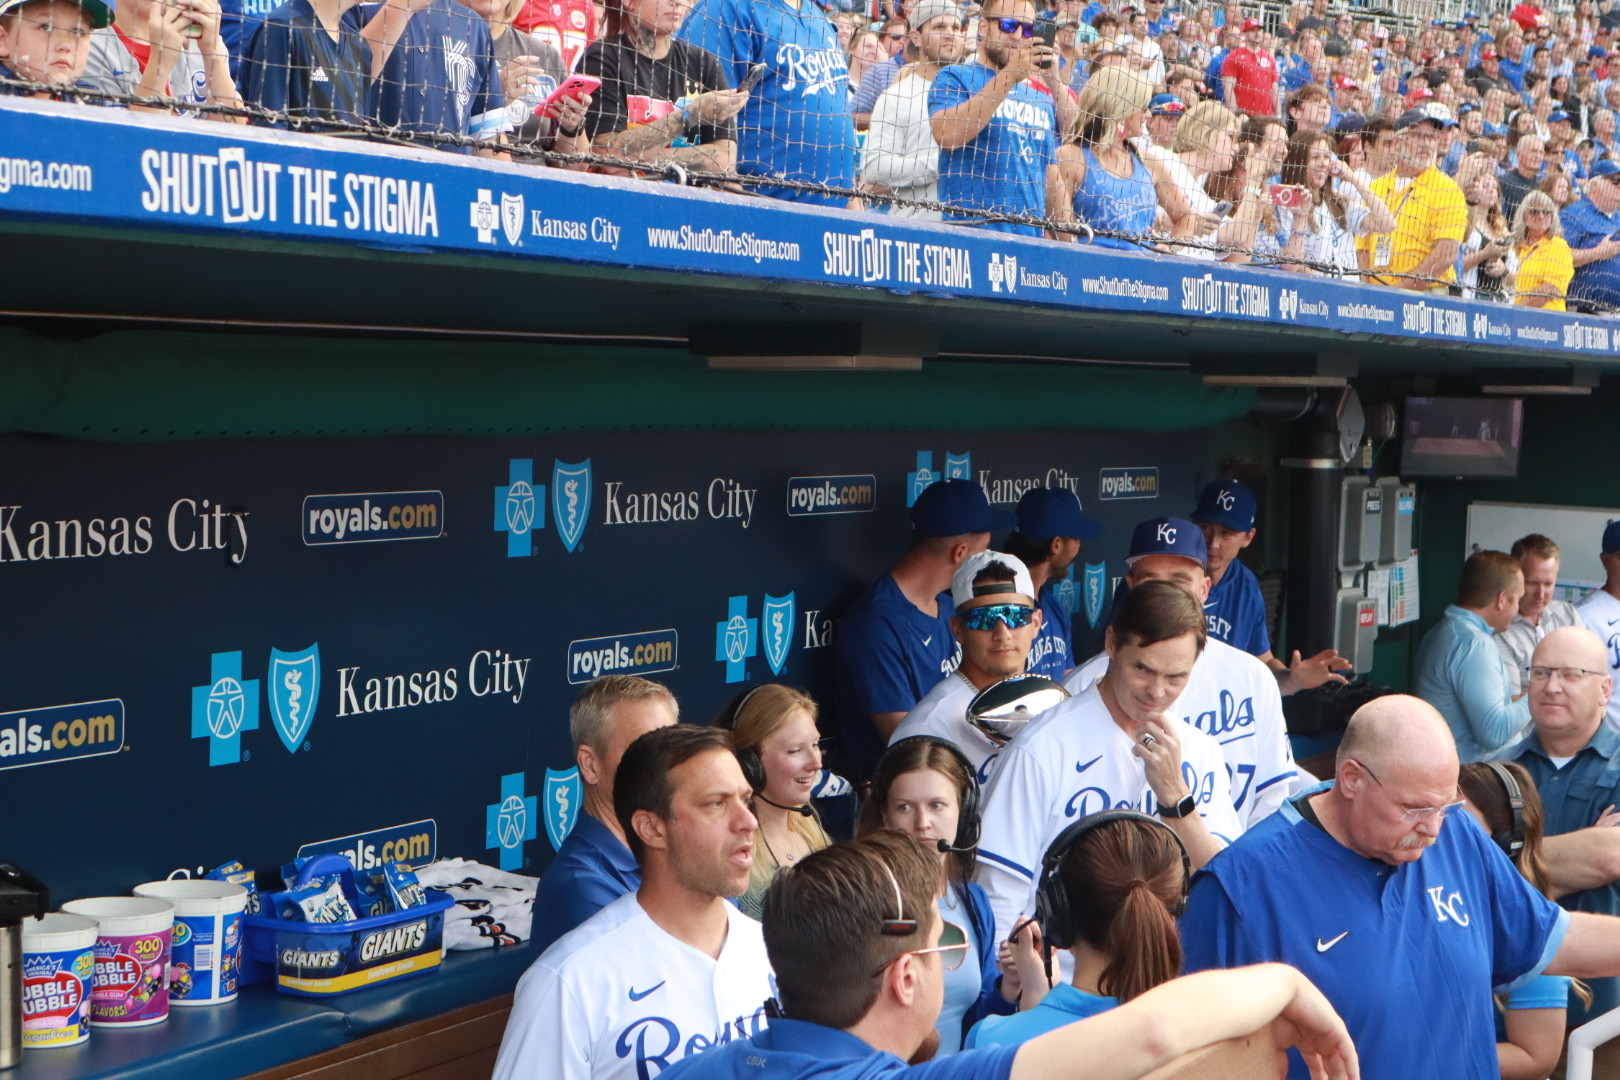 Chiefs Night at the K was a rare opportunity for dual celebration